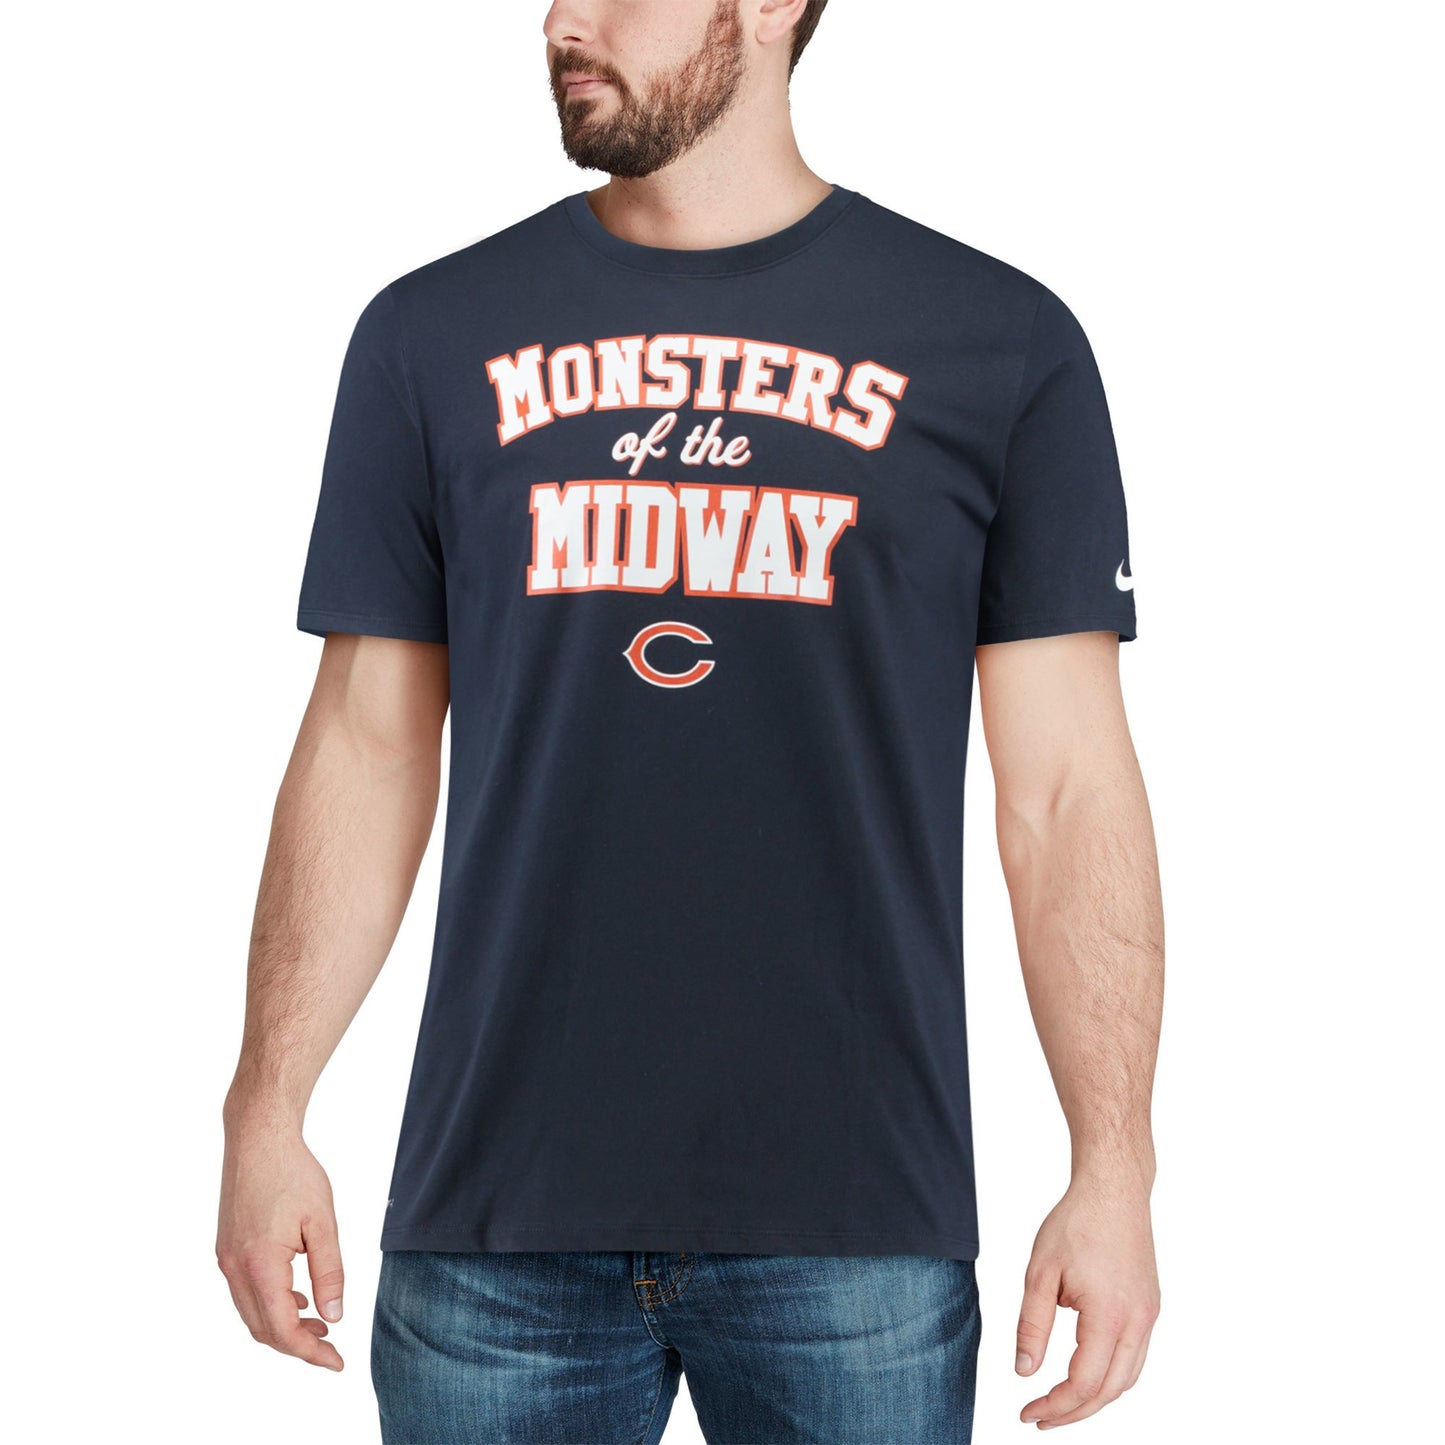 Mens NFL Chicago Bears "Monsters of the Midway" Nike Local Lockup Performance T-Shirt - Navy